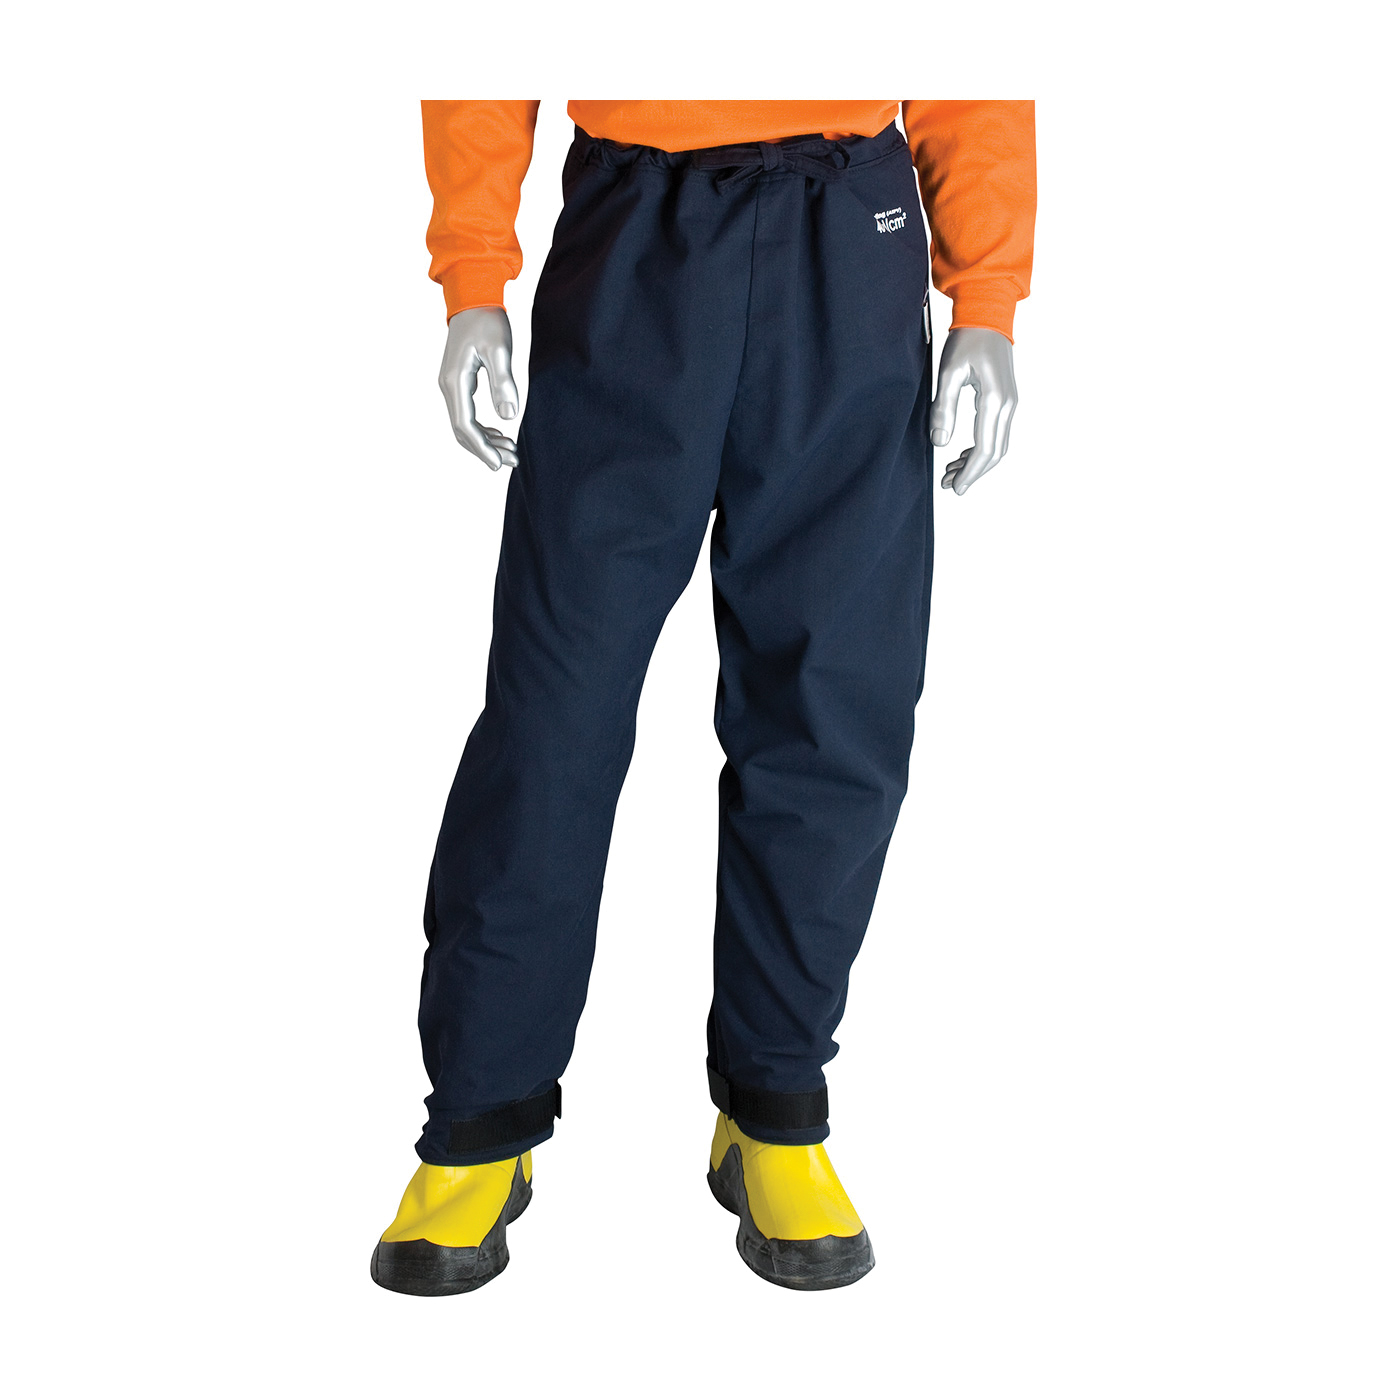 PIP® 9100-530ULT/5X 9100-530ULT Ultralight Flame Resistant Pant, 60 to 62 in Waist, 32 in L Inseam, Navy Blue, DuPont™ Protera®/Westex® UltraSoft® Interlock Knit